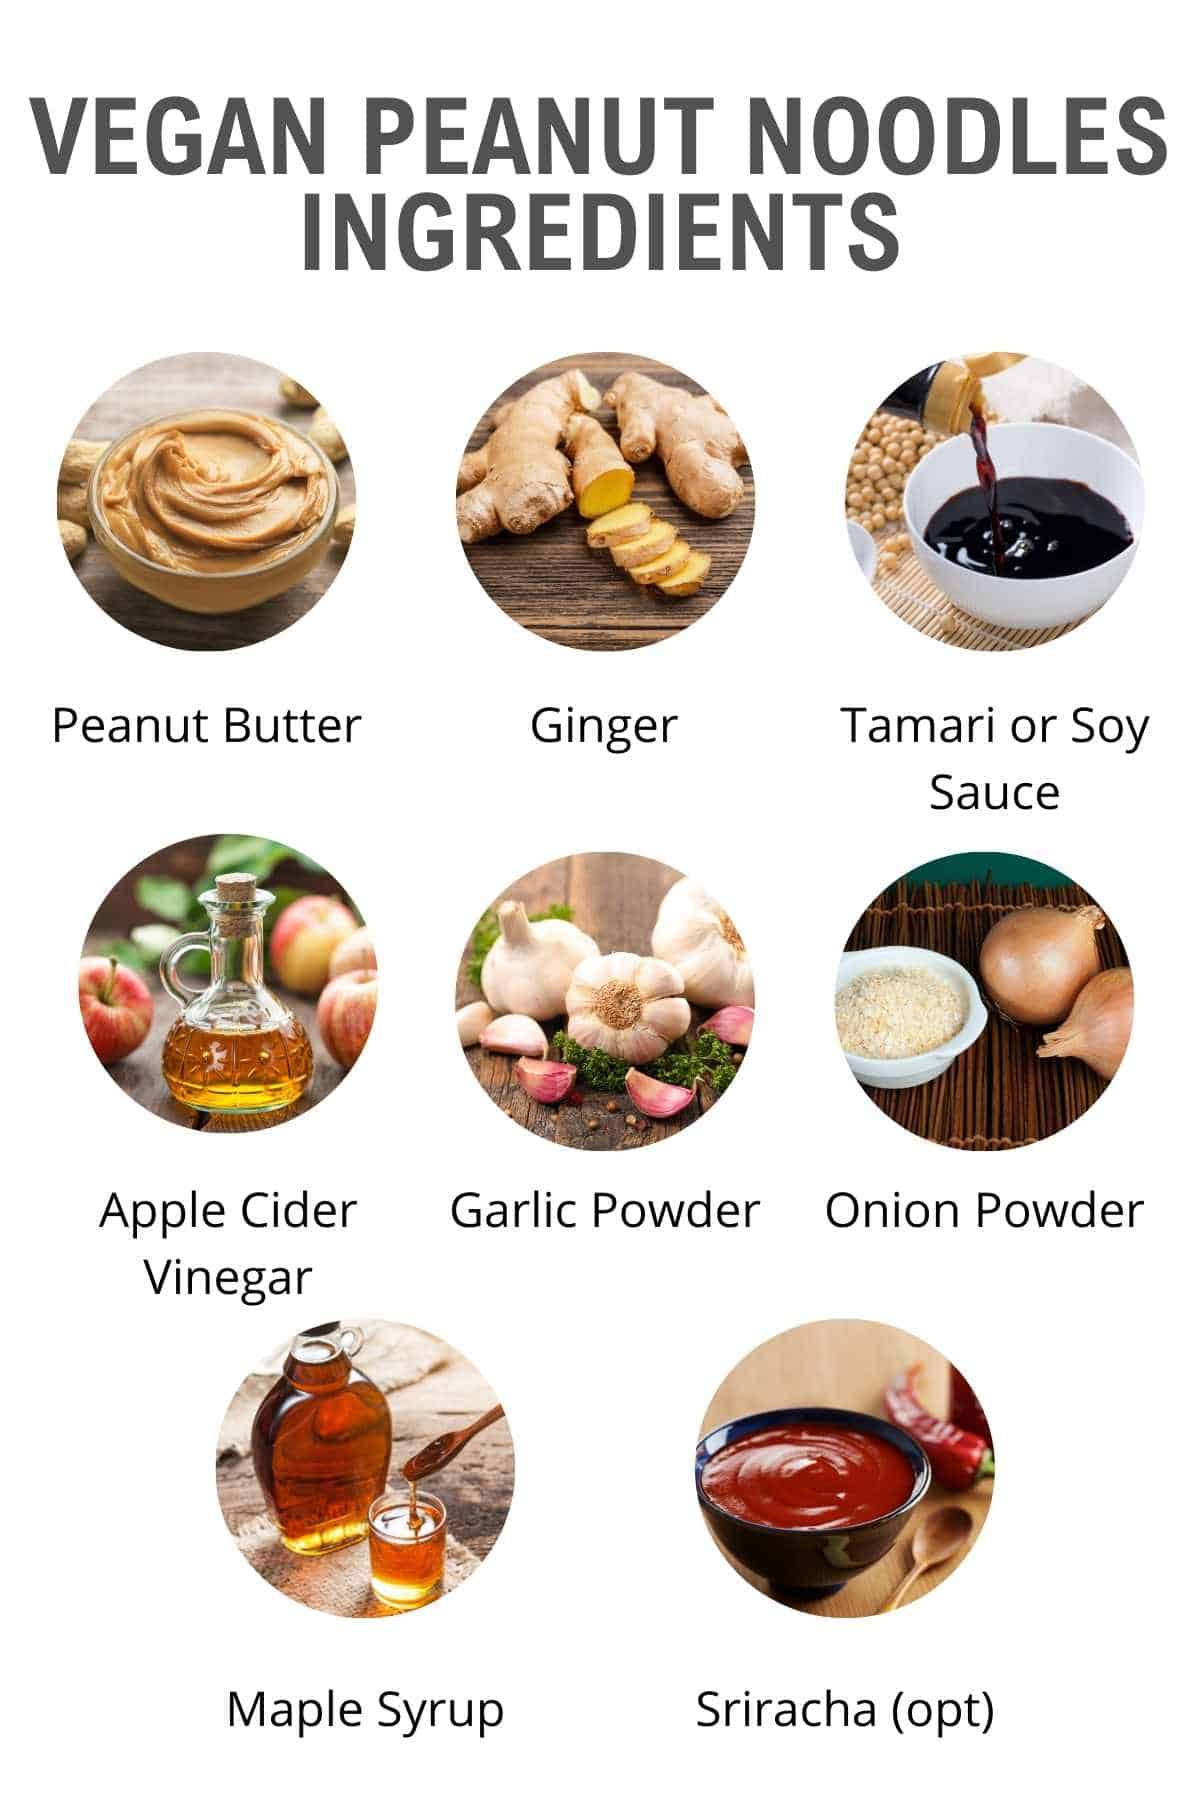 vegan peanut butter noodles ingredients shown in a chart with small photos and text.